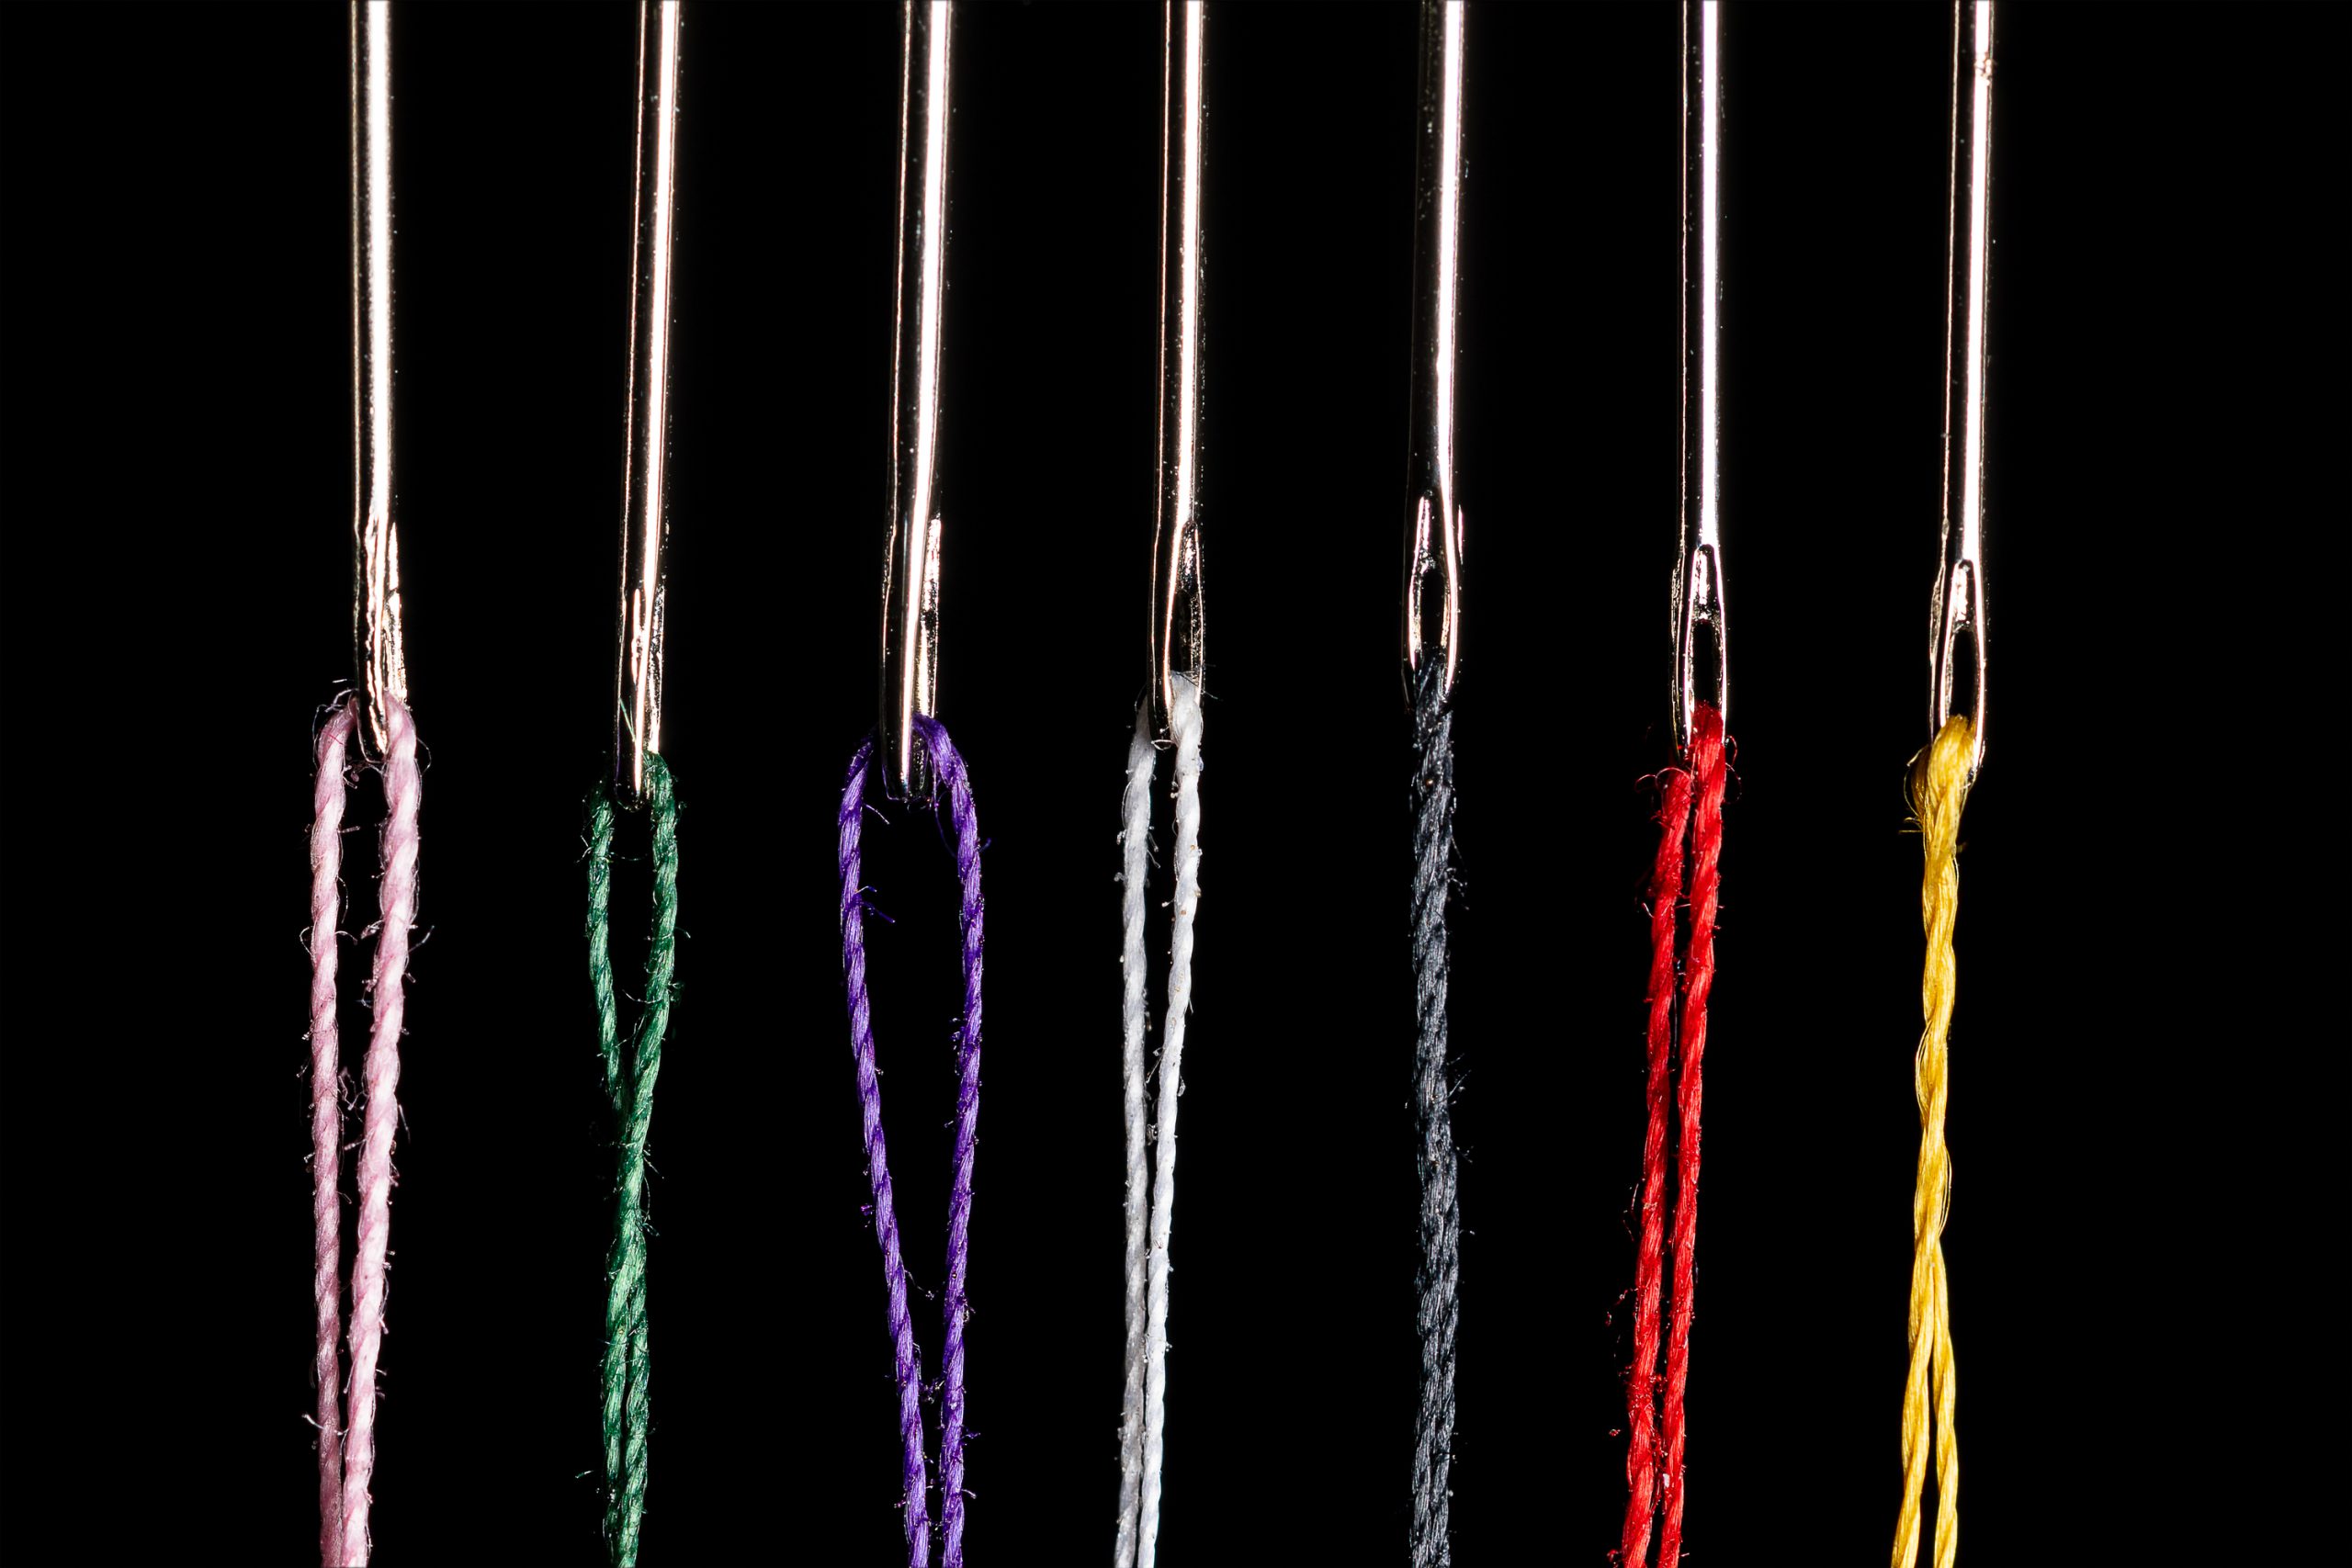 sewing needles each with a different color thread